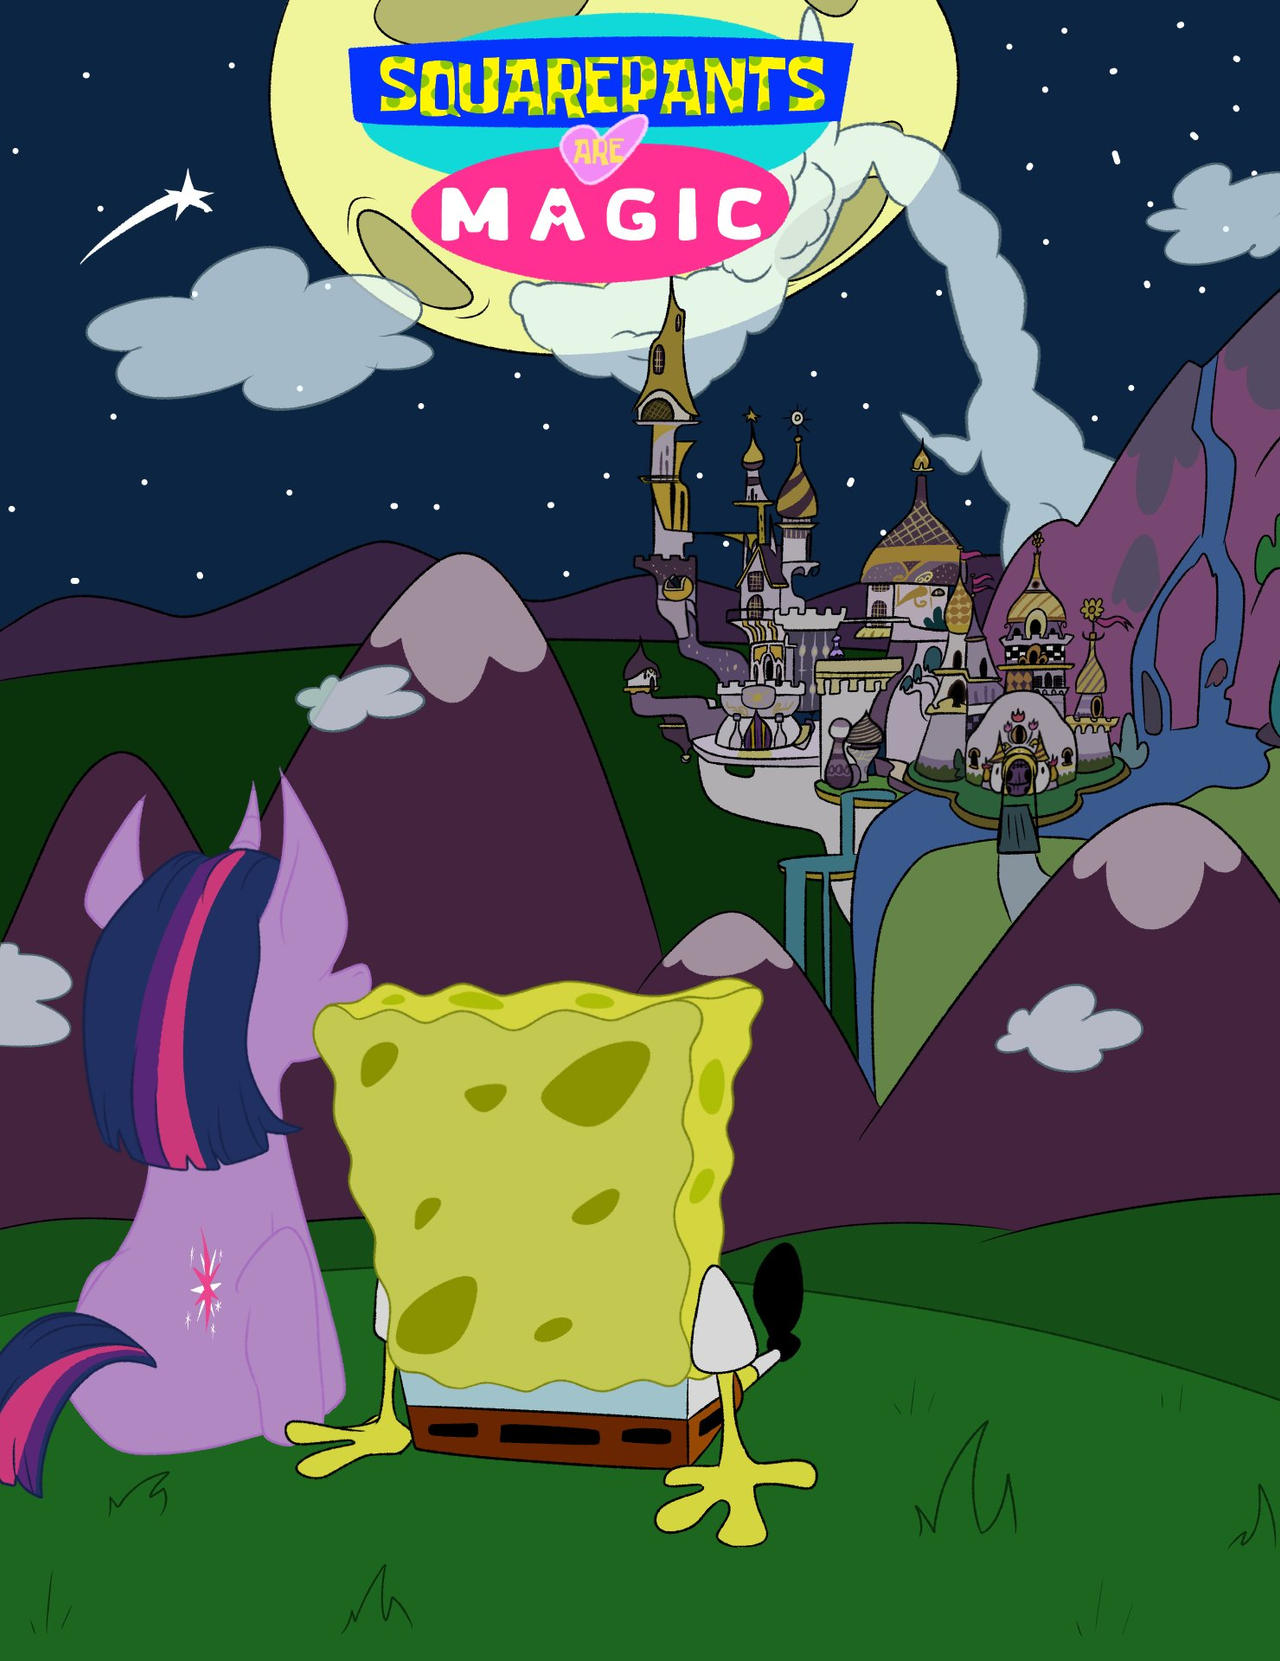 SquarePants Are Magic - Cinematic Poster by yodajax10 on DeviantArt